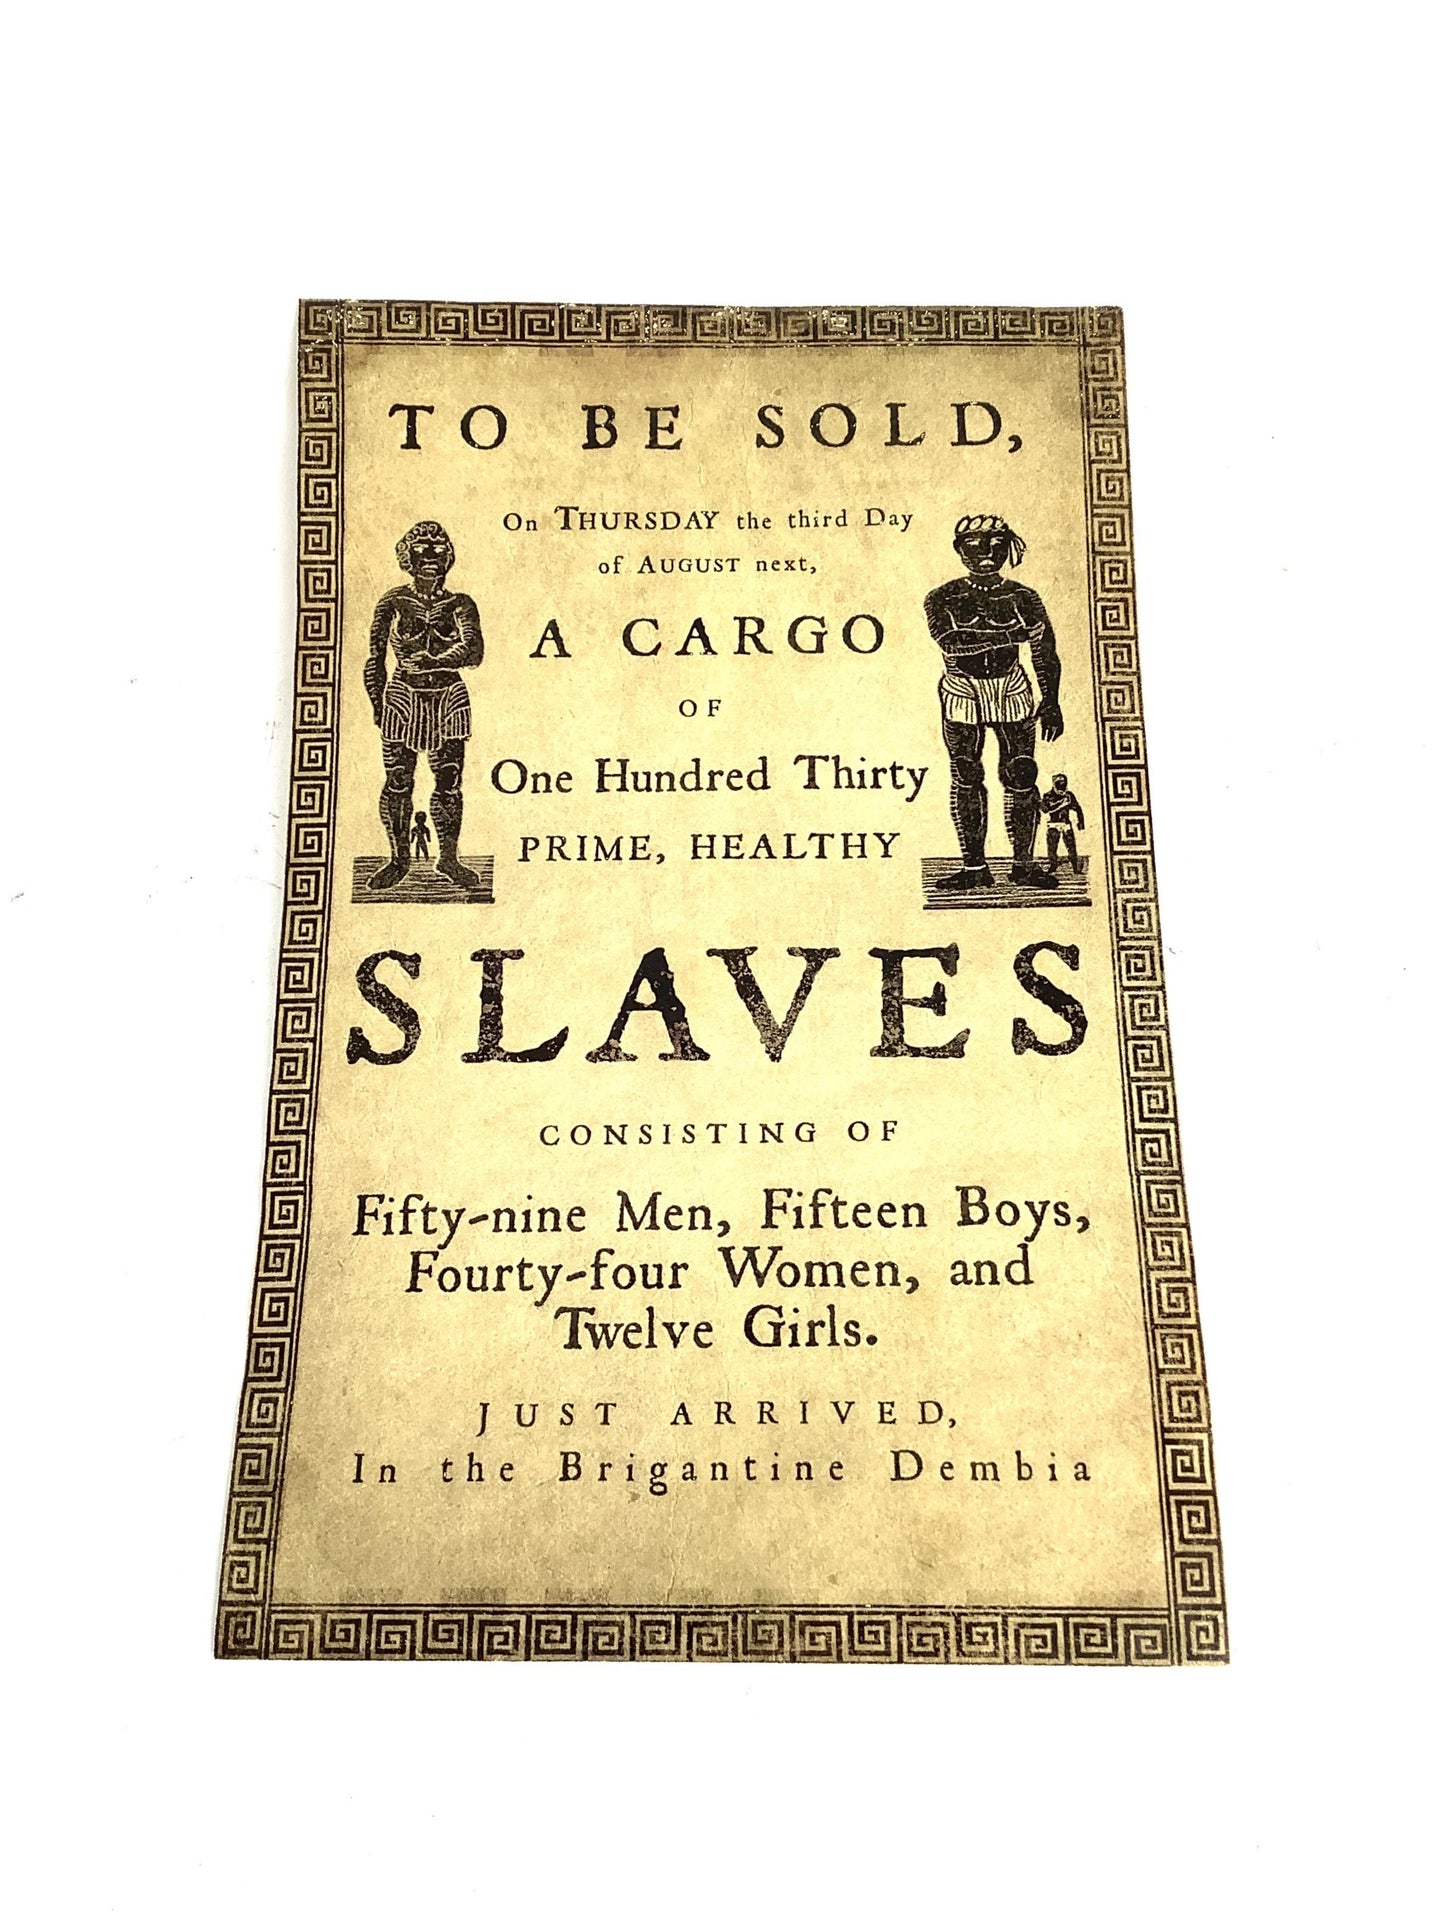 Salem: Withch Slaves to be Sold Poster